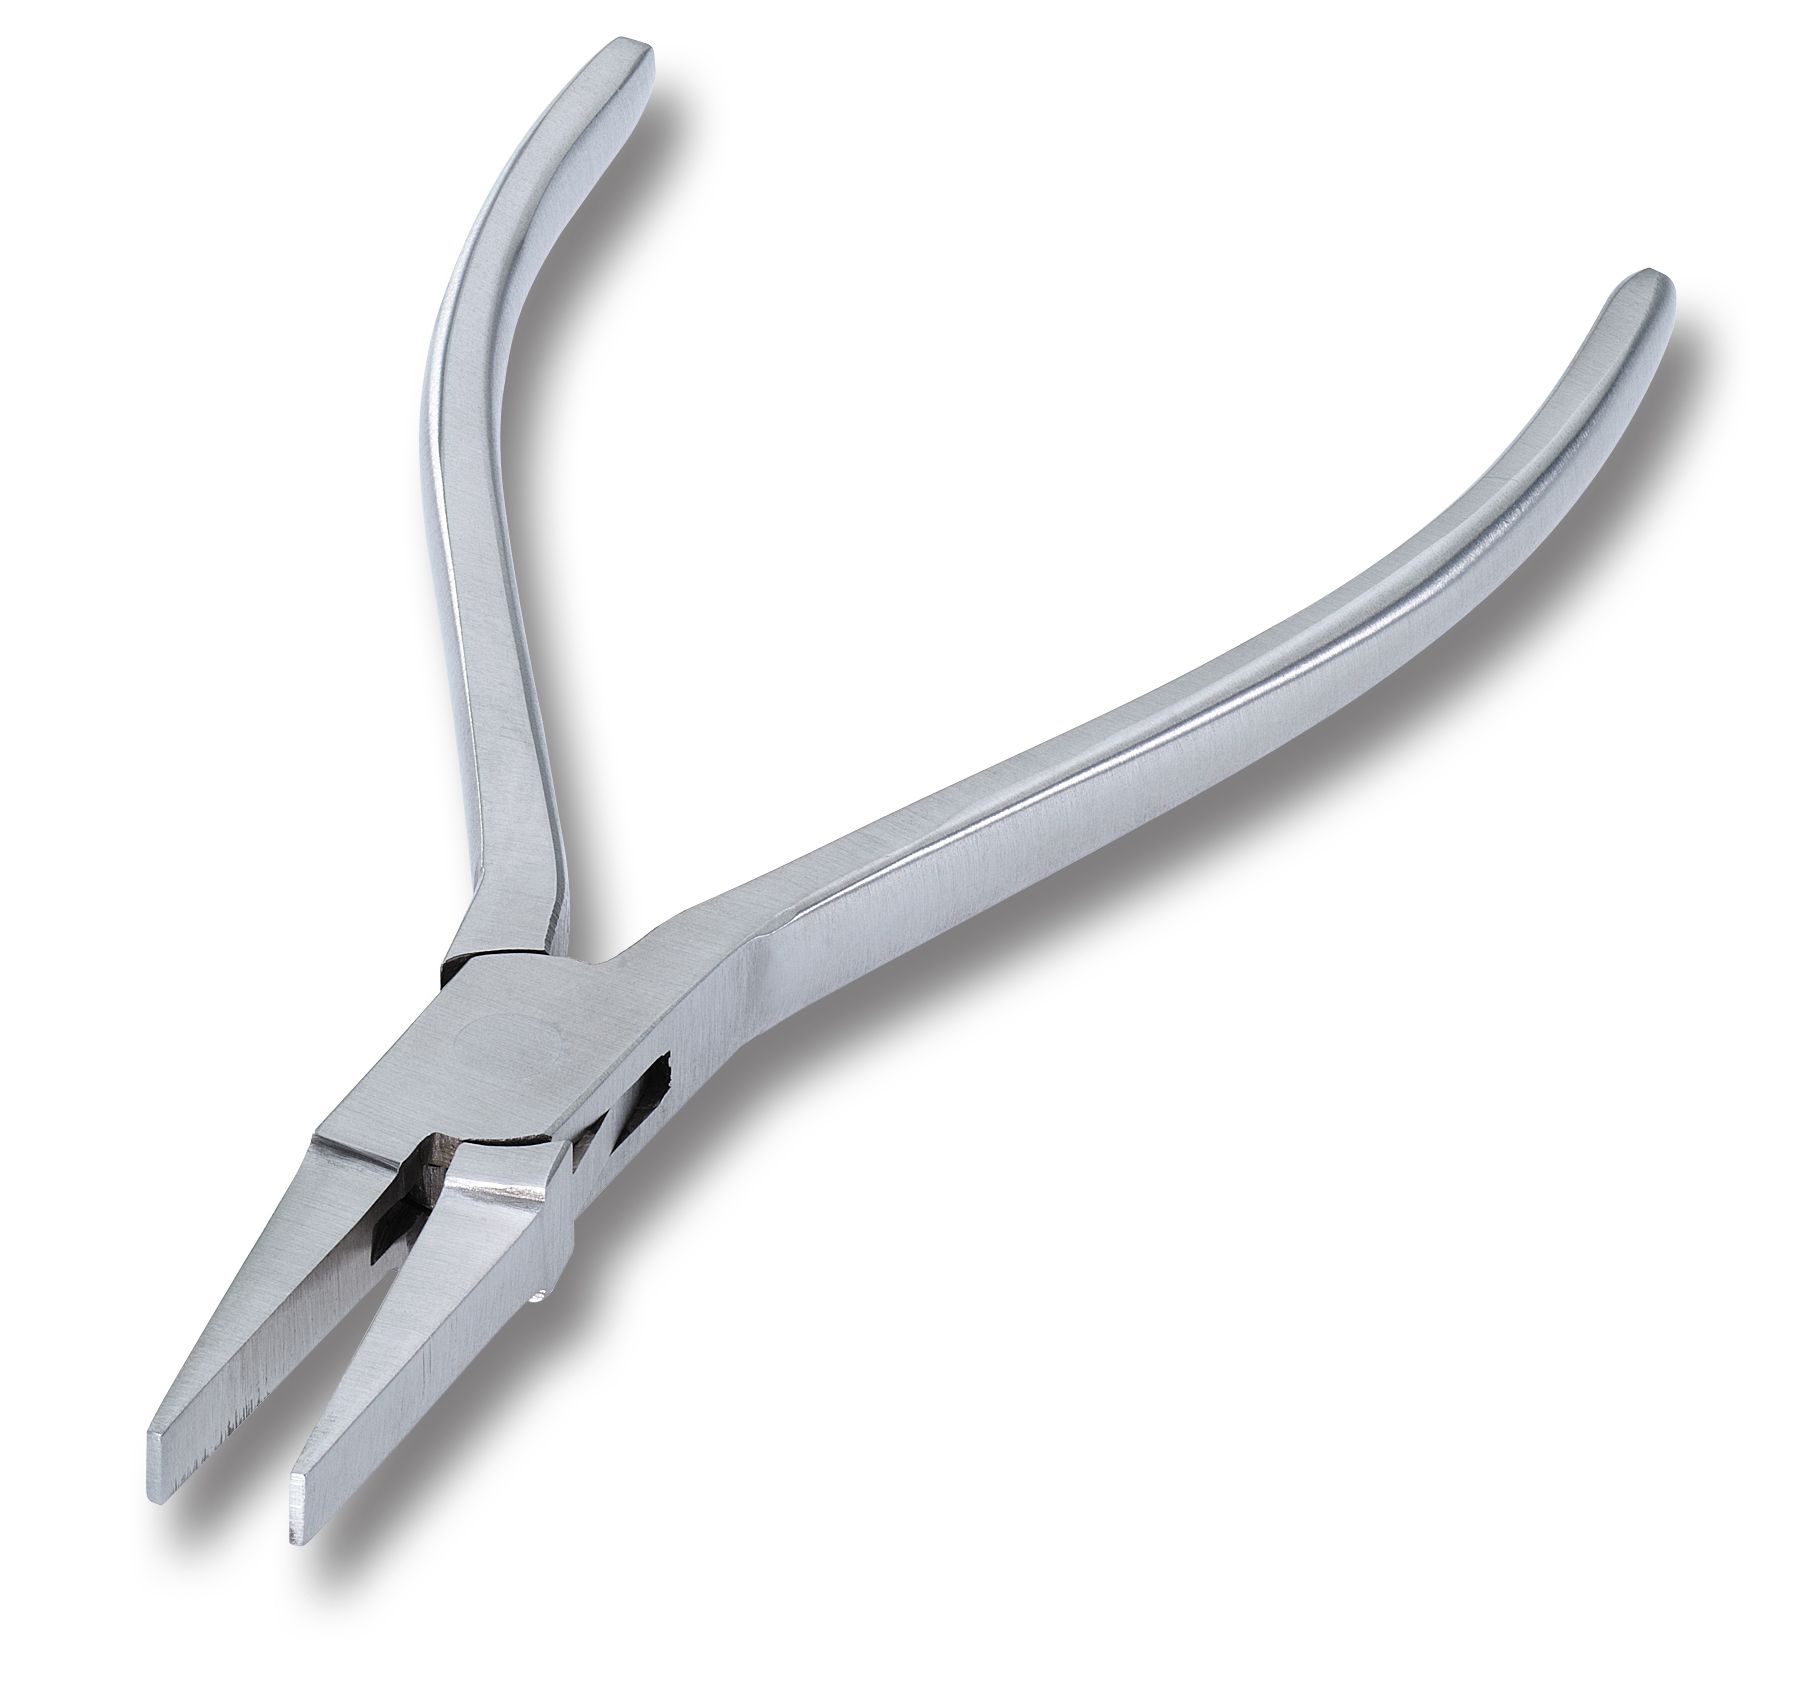 Watchmaker's flat nose pliers with box joint.